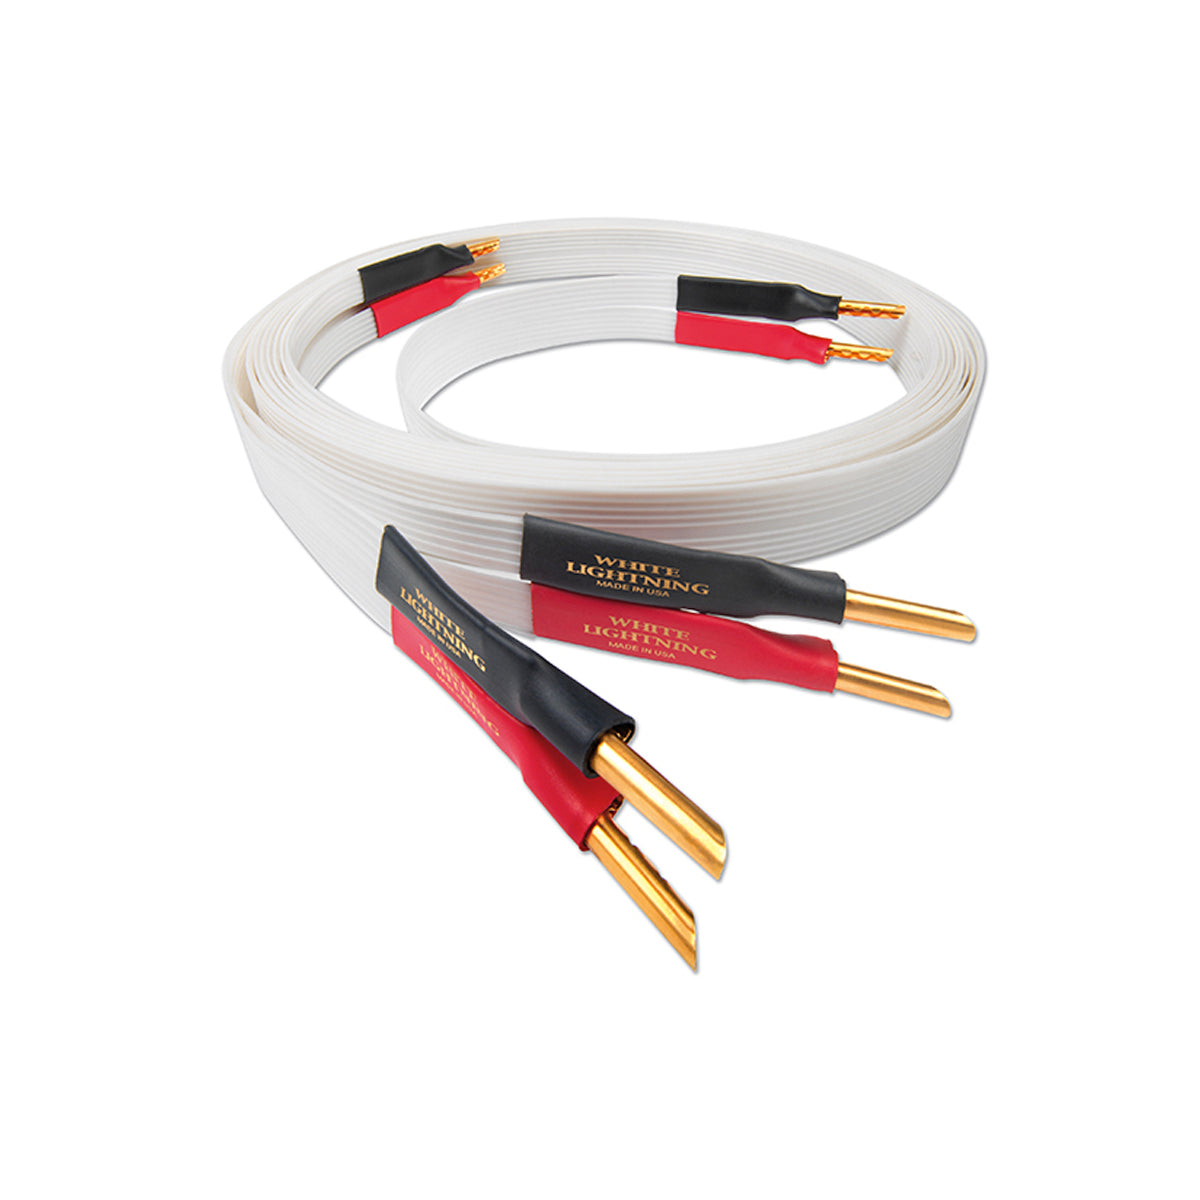 Nordost White Lightning Speaker Cable - The Audio Experts